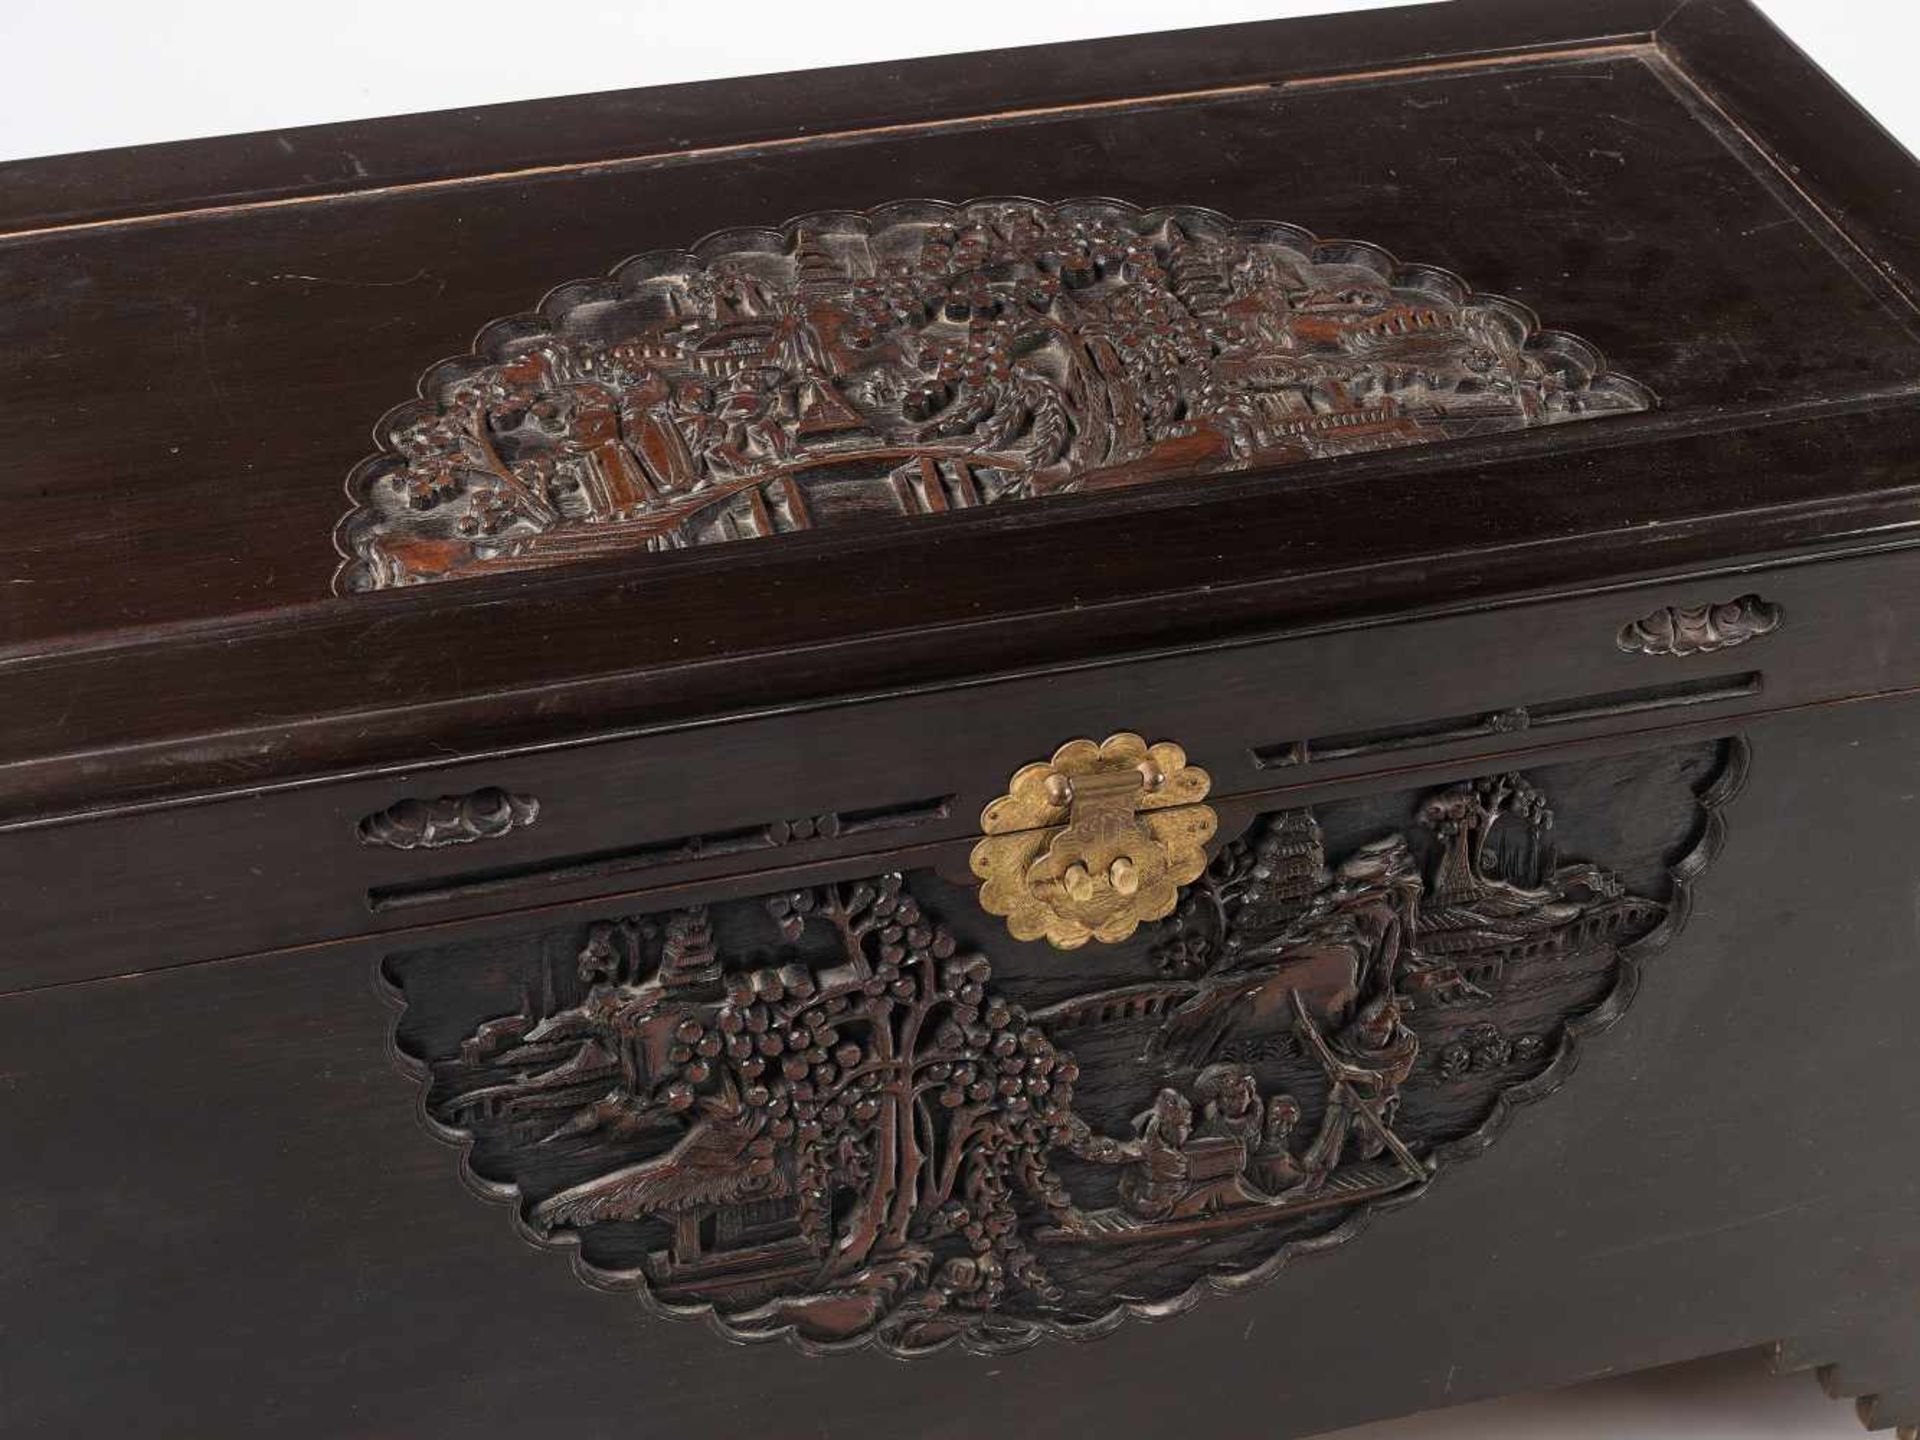 A LARGE CHINESE HARDWOOD CHEST, LATE QING DYNASTY – REPUBLIC PERIODCarved from solid hardwood, - Bild 3 aus 5